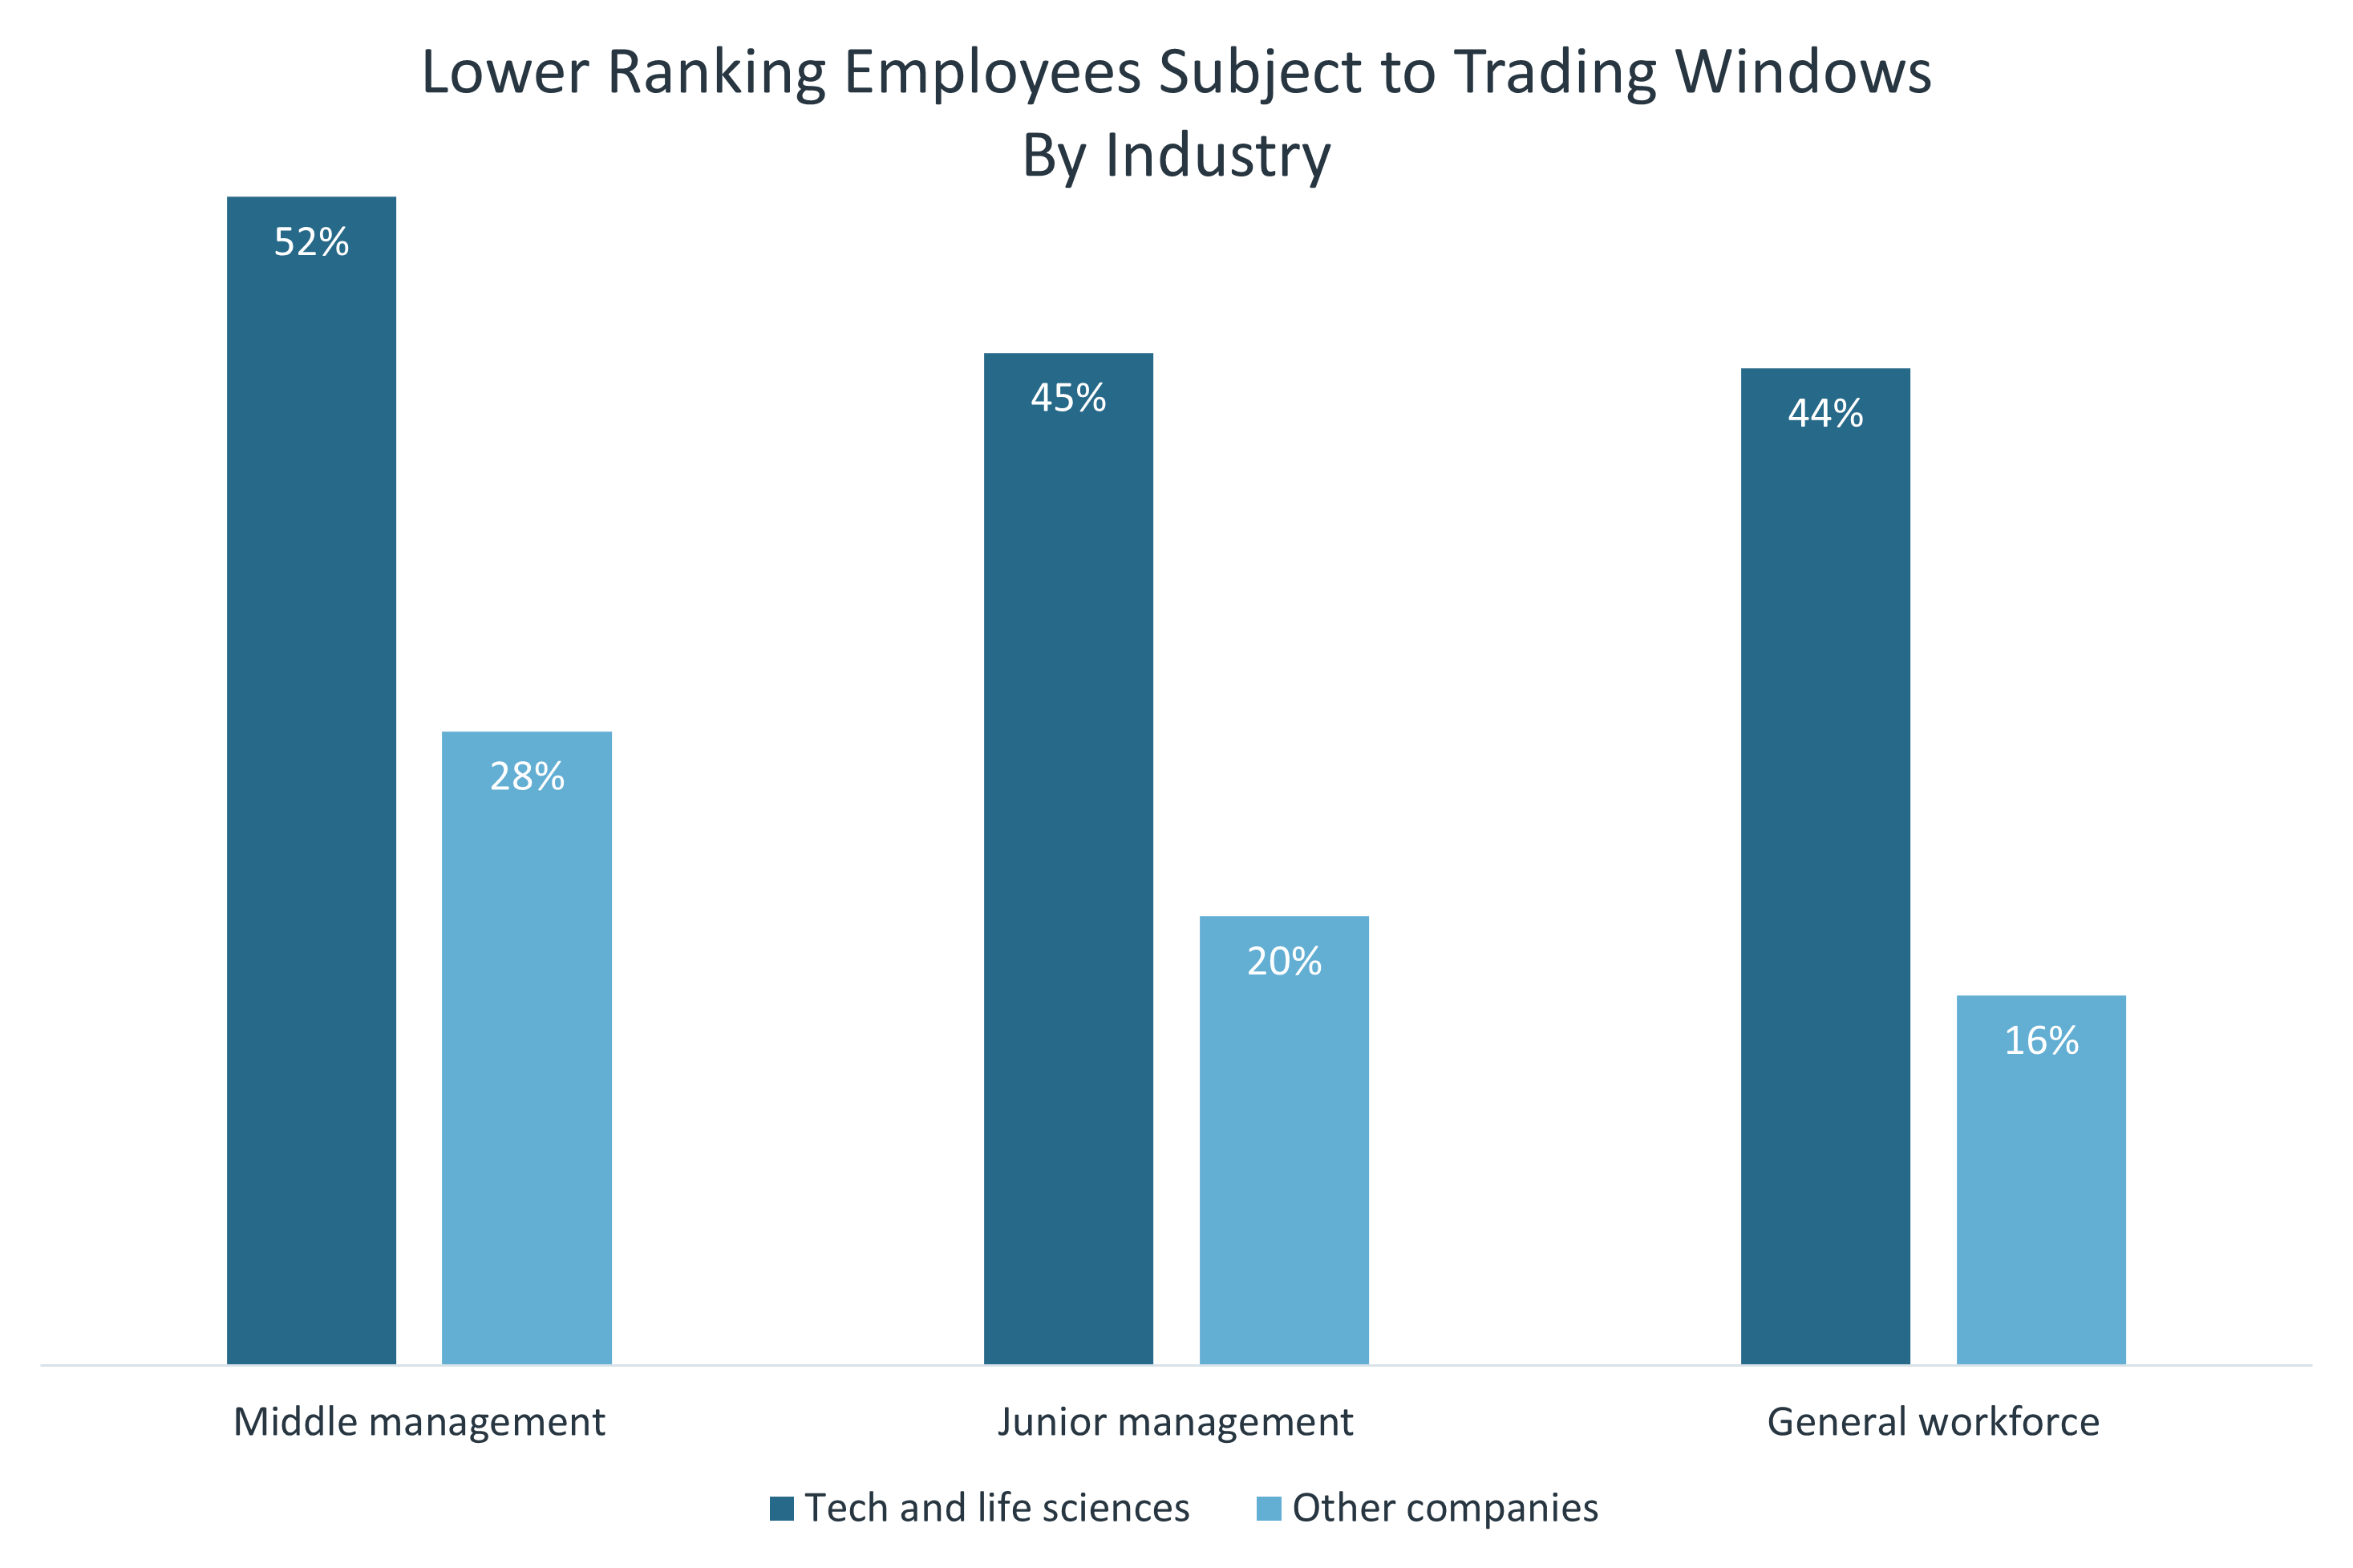 Chart showing percentage of companies that subject lower ranking employees to trading windows, reported by number of employees.